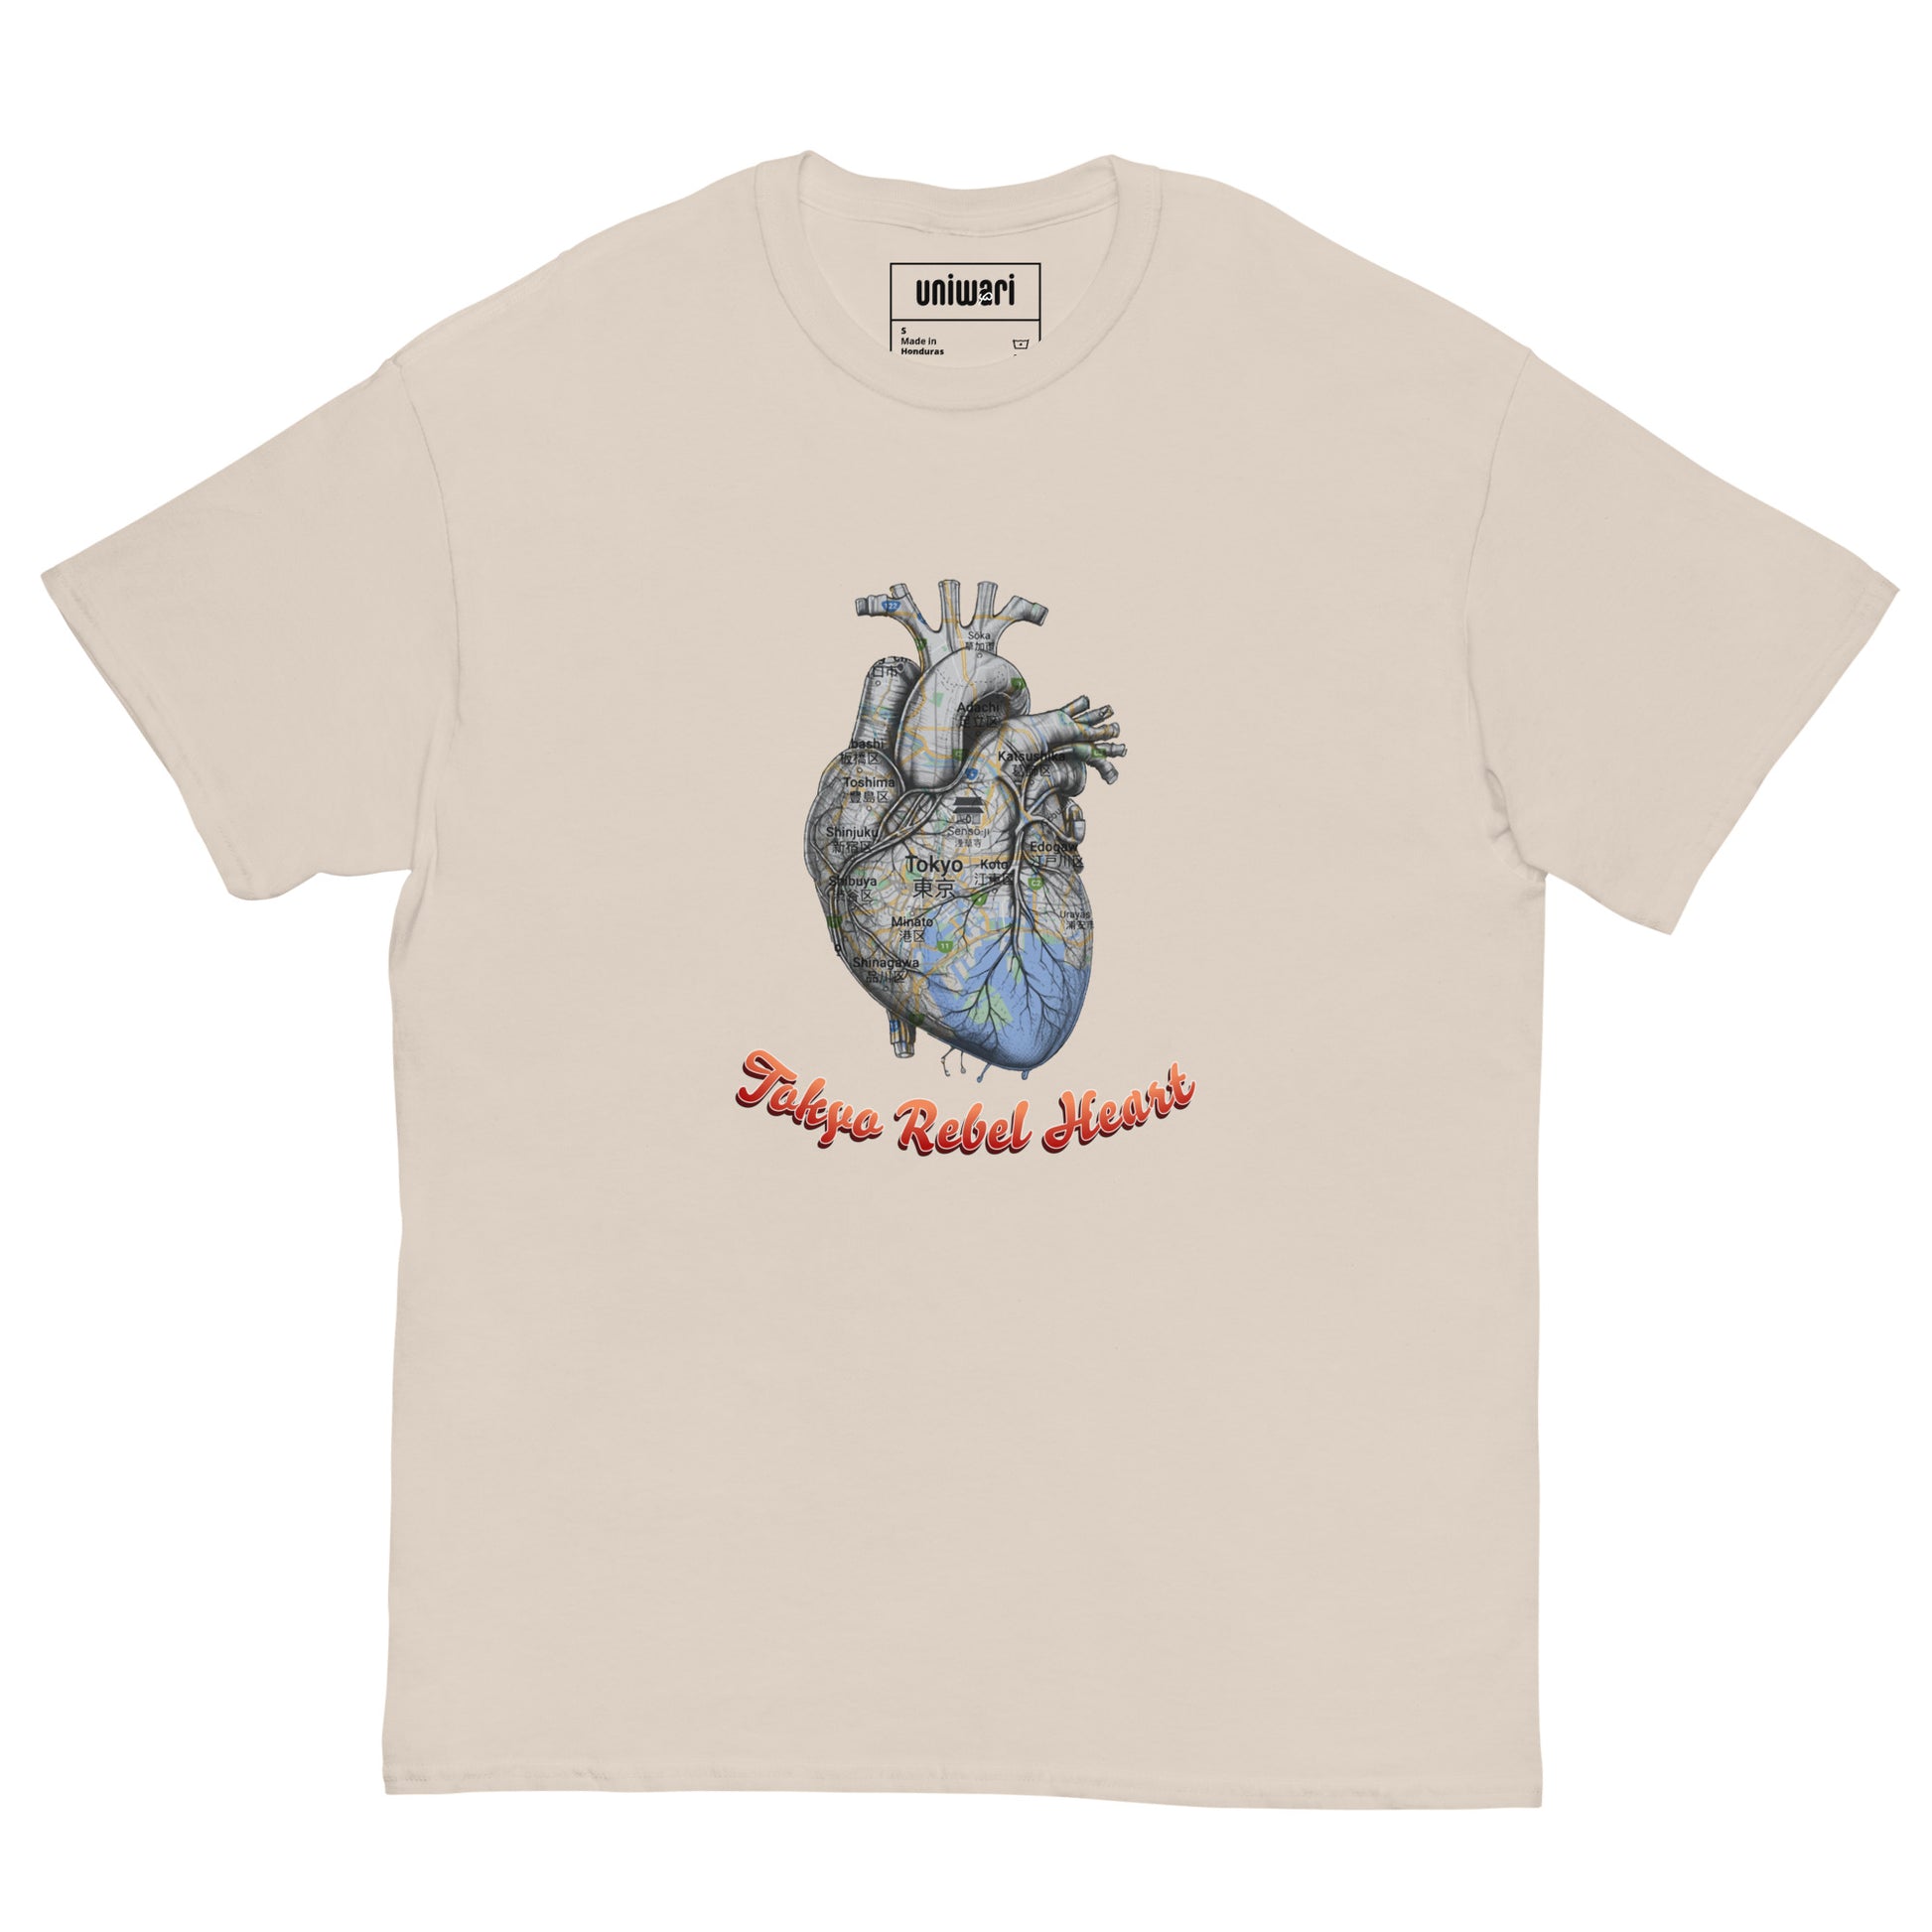 Beige High Quality Tee - Front Design with a Heart Shaped Map of Tokyo and a Phrase "Tokyo Rebel Heart" print